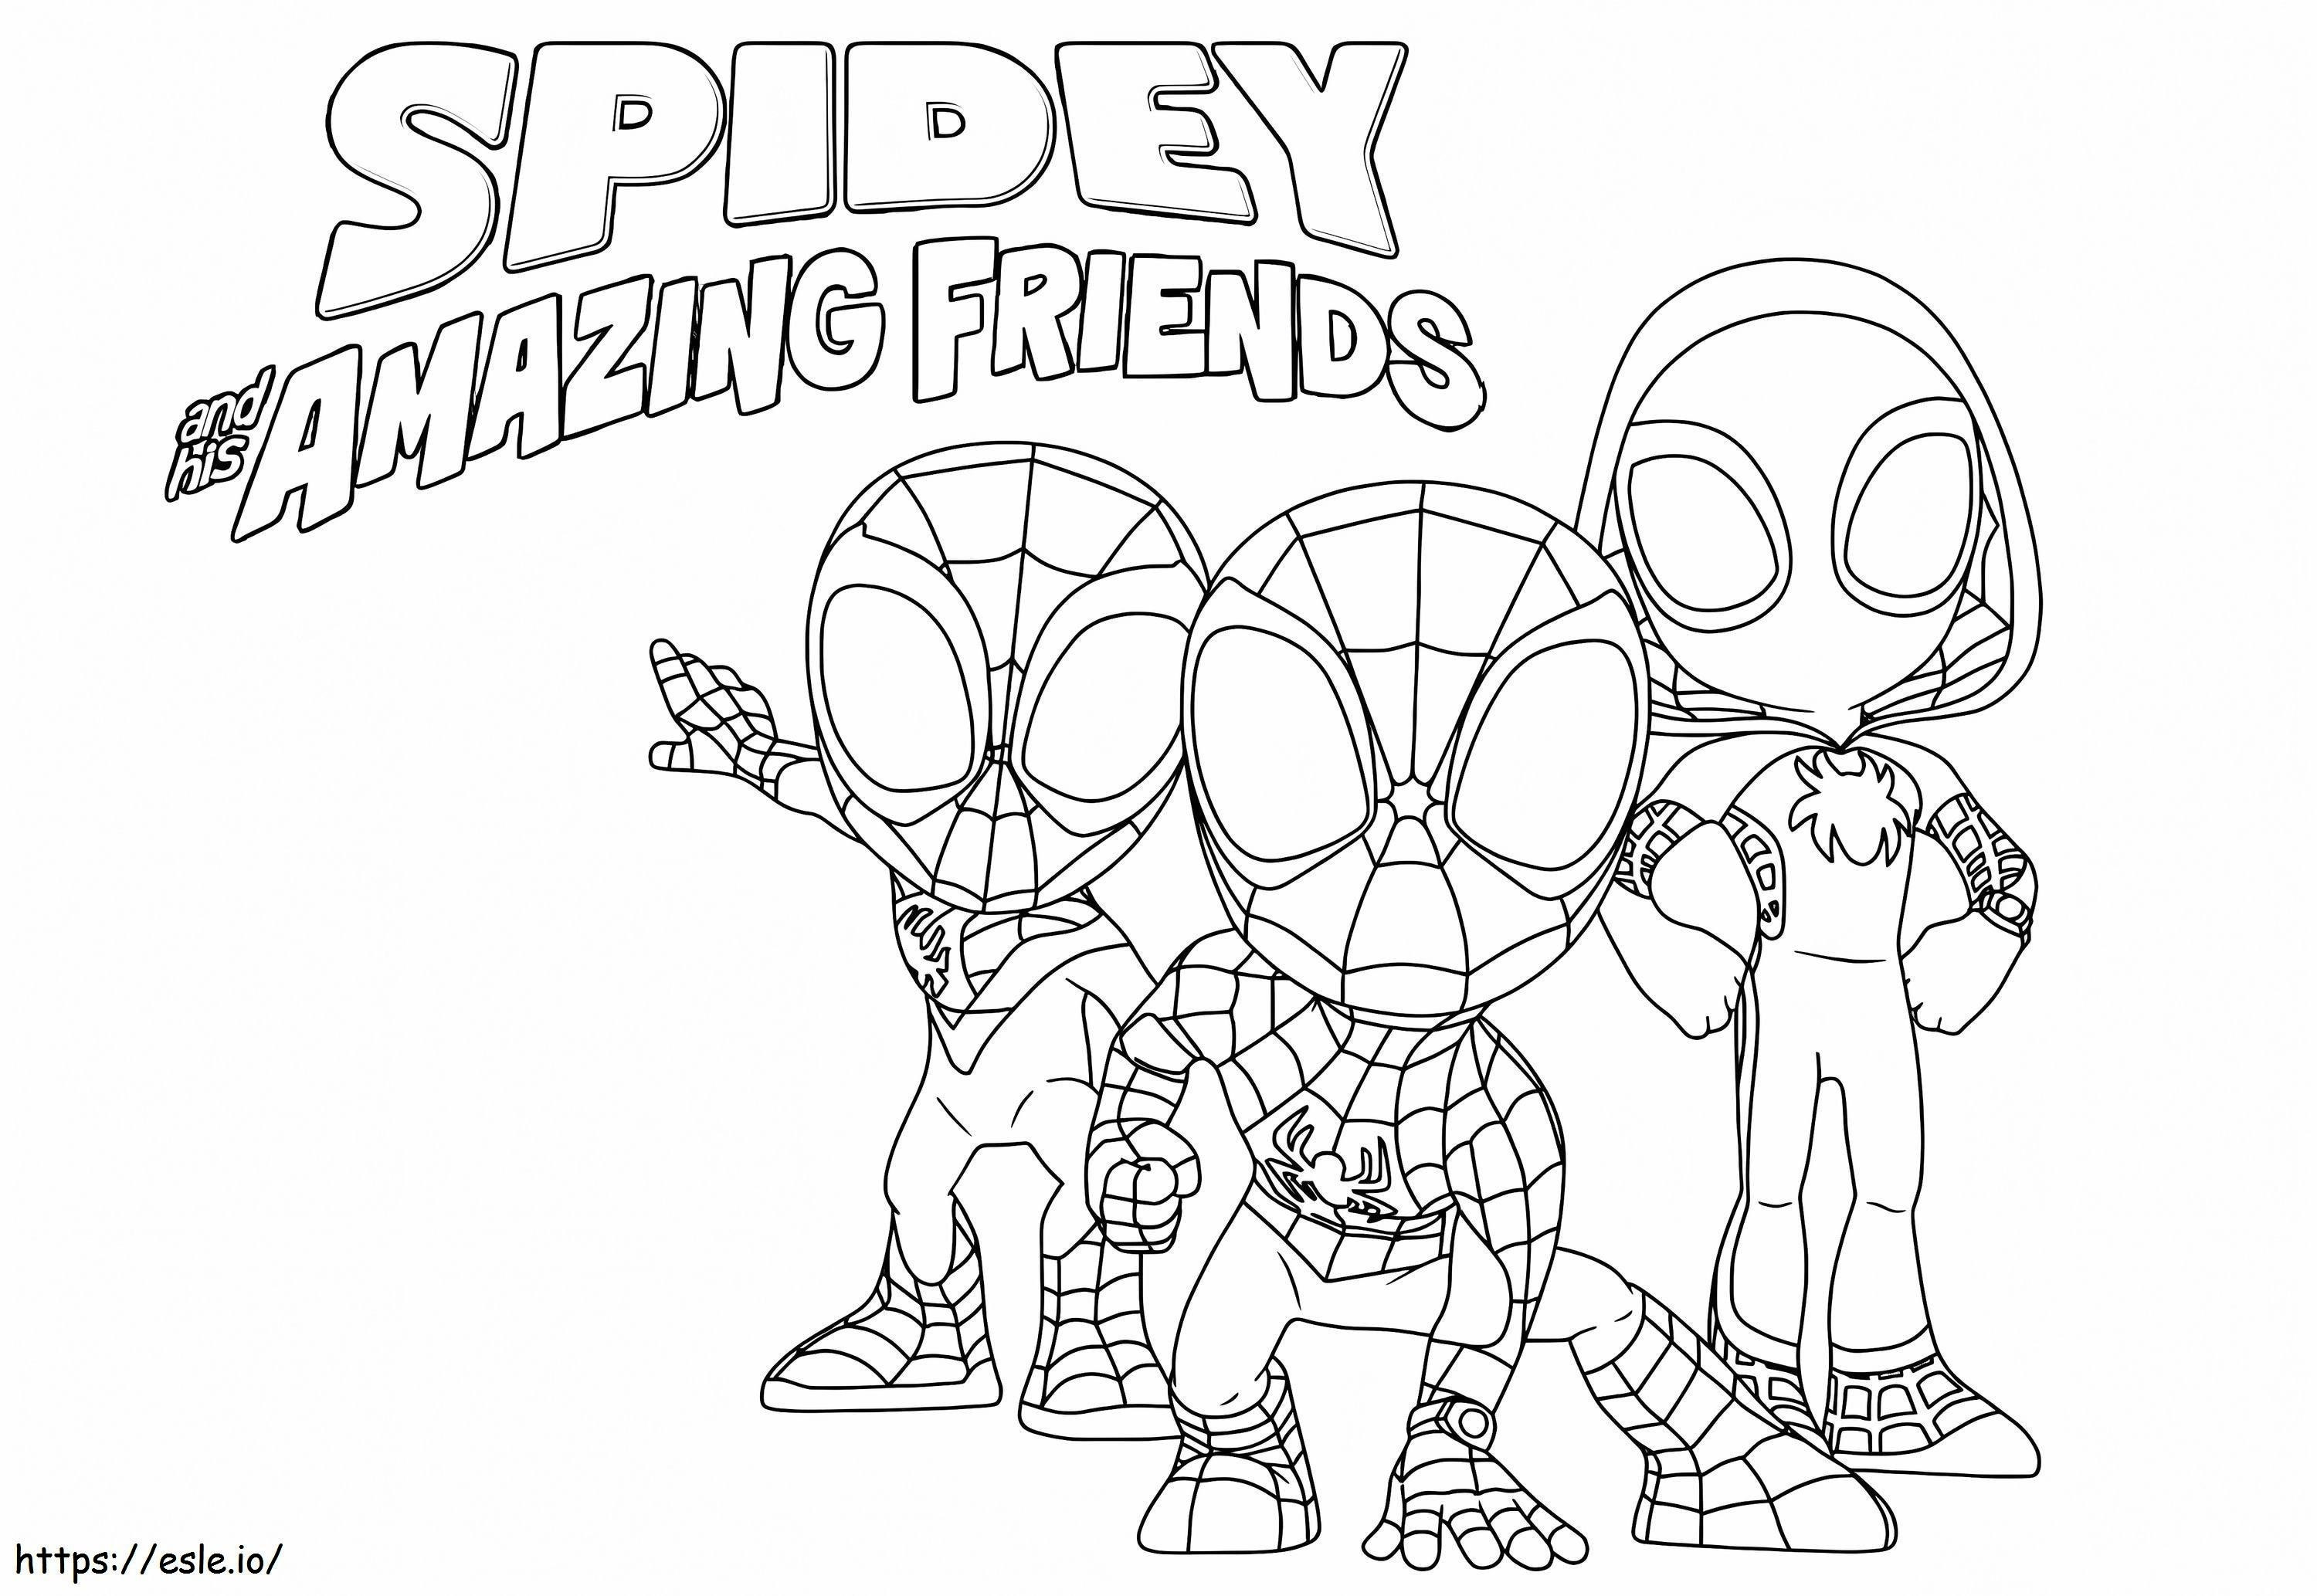 Spidey And His Amazing Friends Printable coloring page